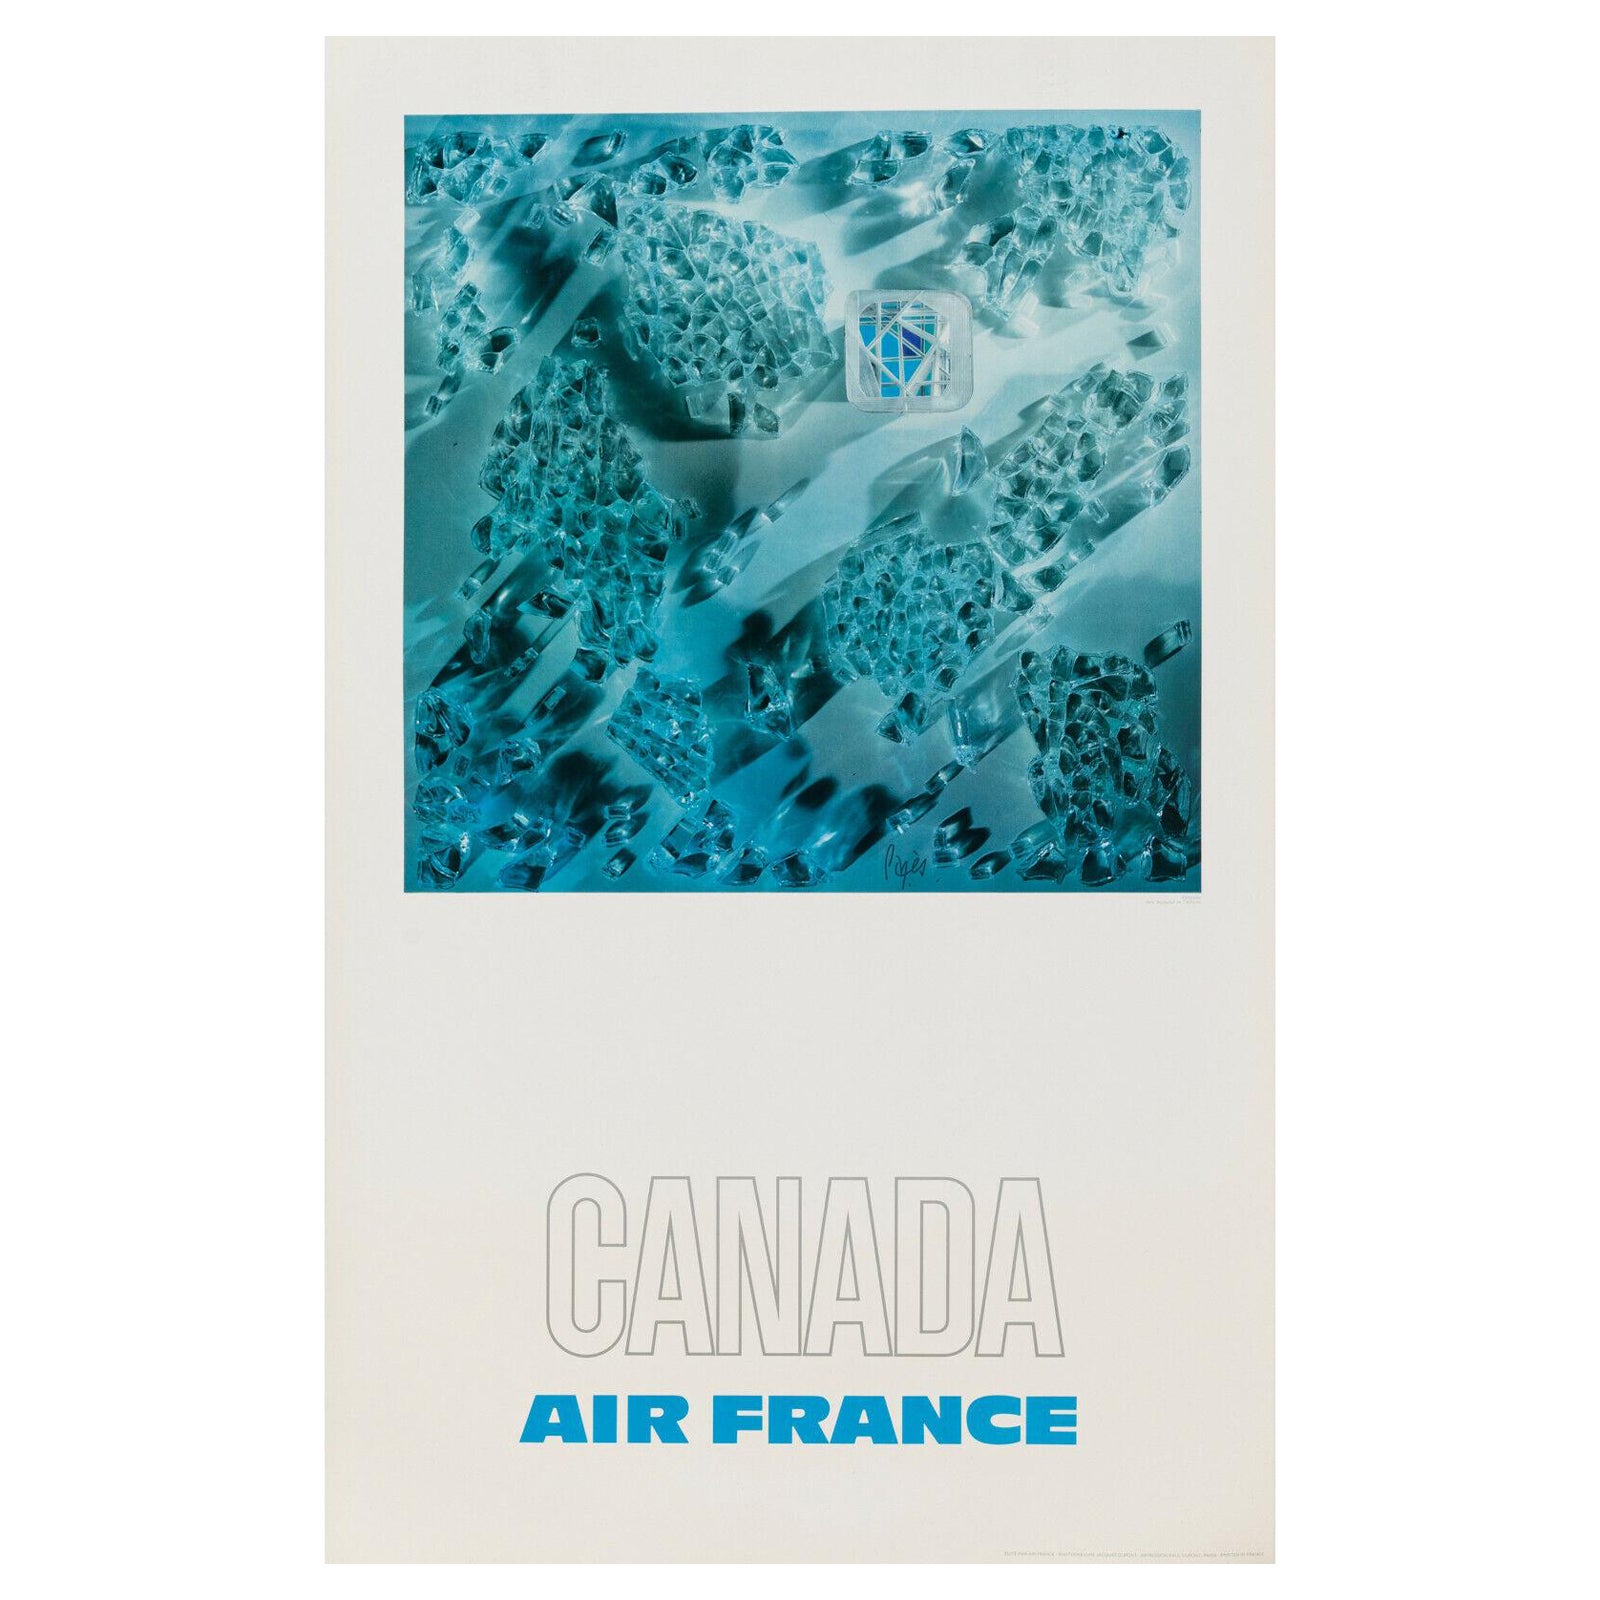 Raymond Pages, Original Vintage Airline Poster, Air France, Canada, 1971